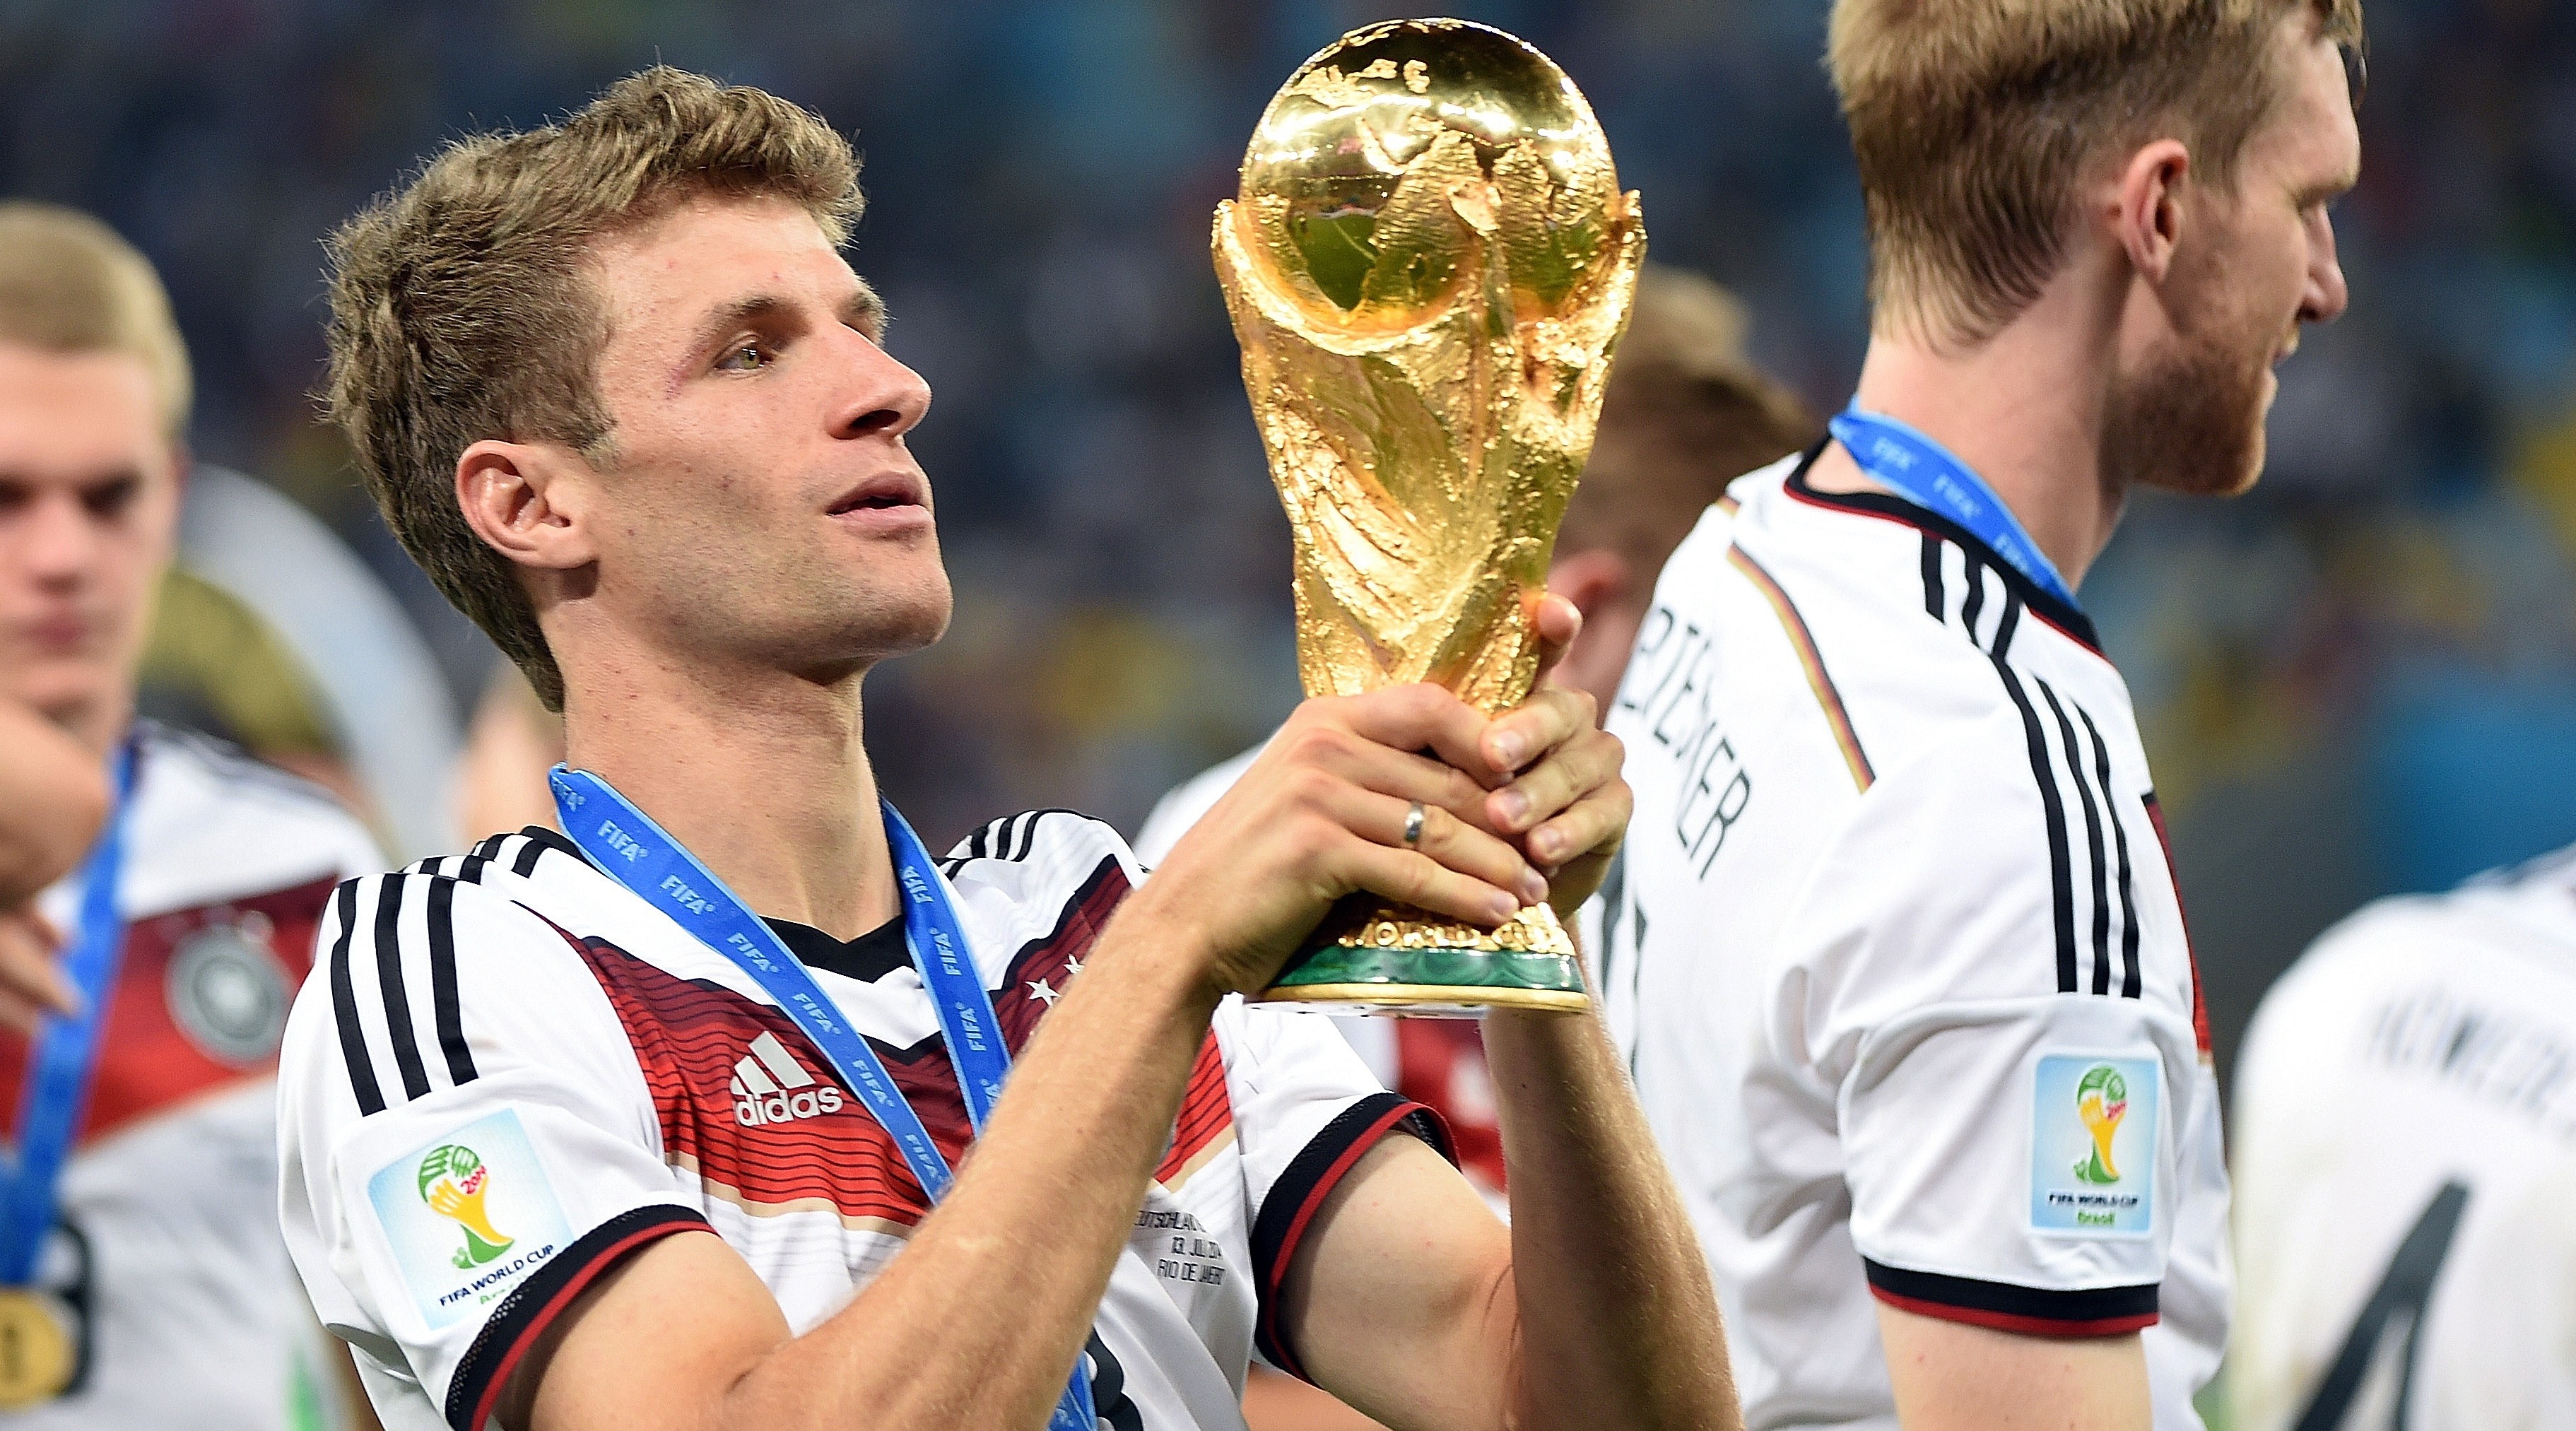 Germany's forward Thomas Mueller holds the World Cup trophy after winning the final football match between Germany and Argentina for the FIFA World Cup at The Maracana Stadium in Rio de Janeiro on July 13, 2014. AFP PHOTO / PATRIK STOLLARZ (Photo credit should read PATRIK STOLLARZ/AFP via Getty Images)